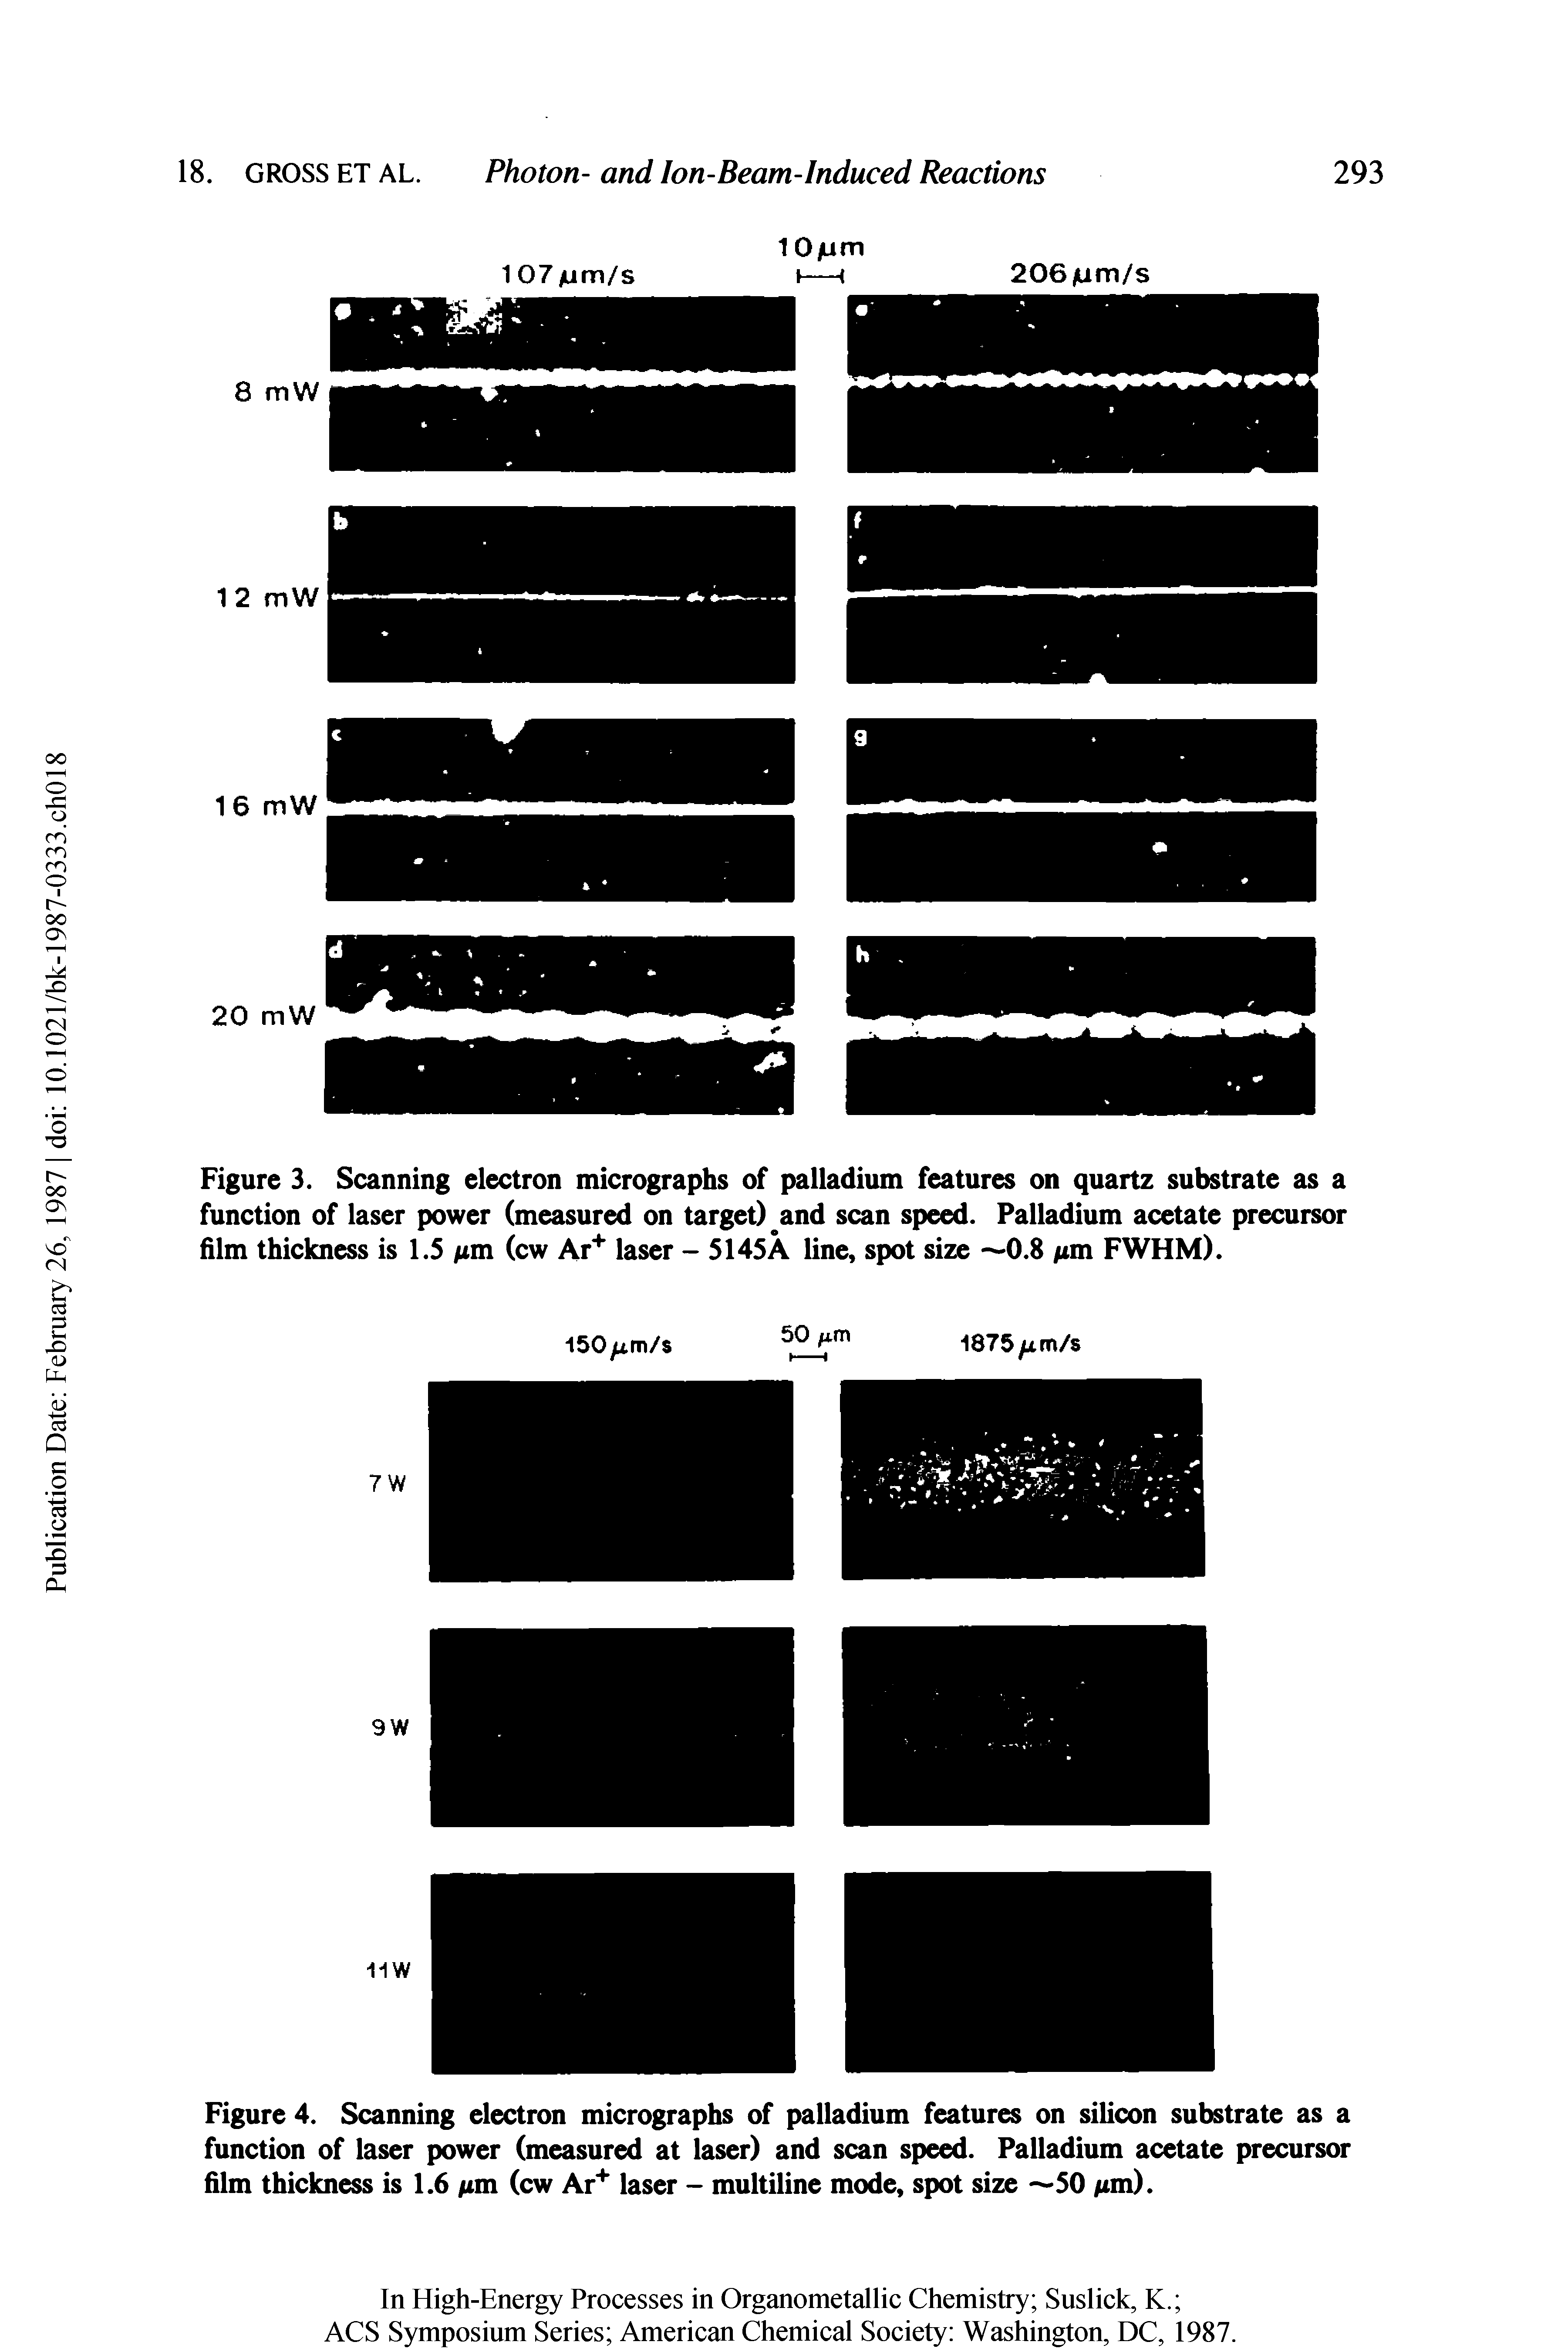 Figure 4. Scanning electron micrographs of palladium features on silicon substrate as a function of laser power (measured at laser) and scan speed. Palladium acetate precursor film thickness is 1.6 pm (cw Ar+ laser - multiline mode, spot size —50 /mi).